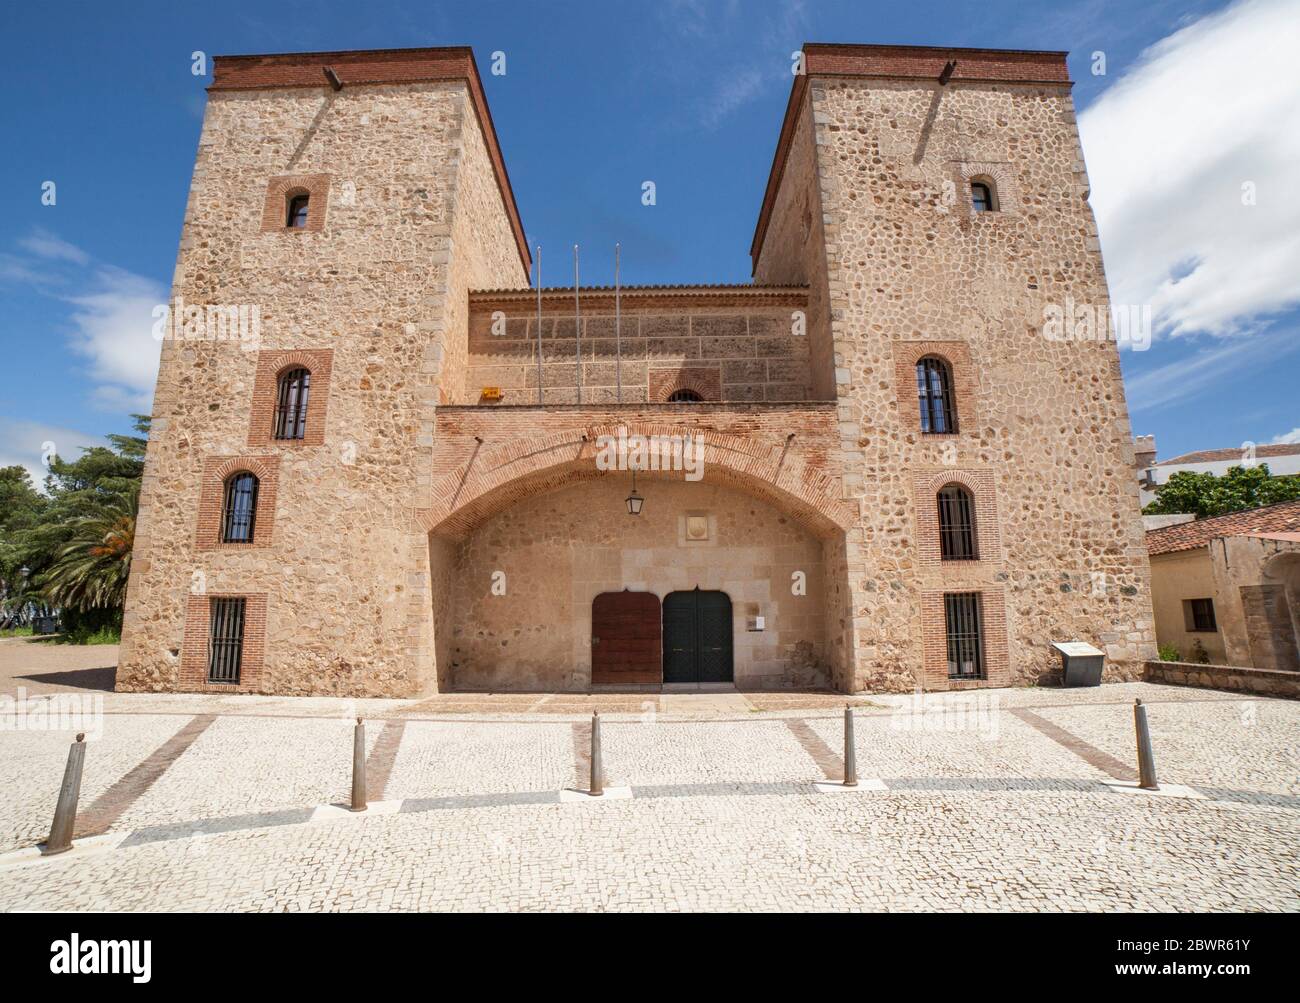 Badajoz Provincial Archaeology Museum facade, Spain. Former Palace of the Counts of Roca. Stock Photo